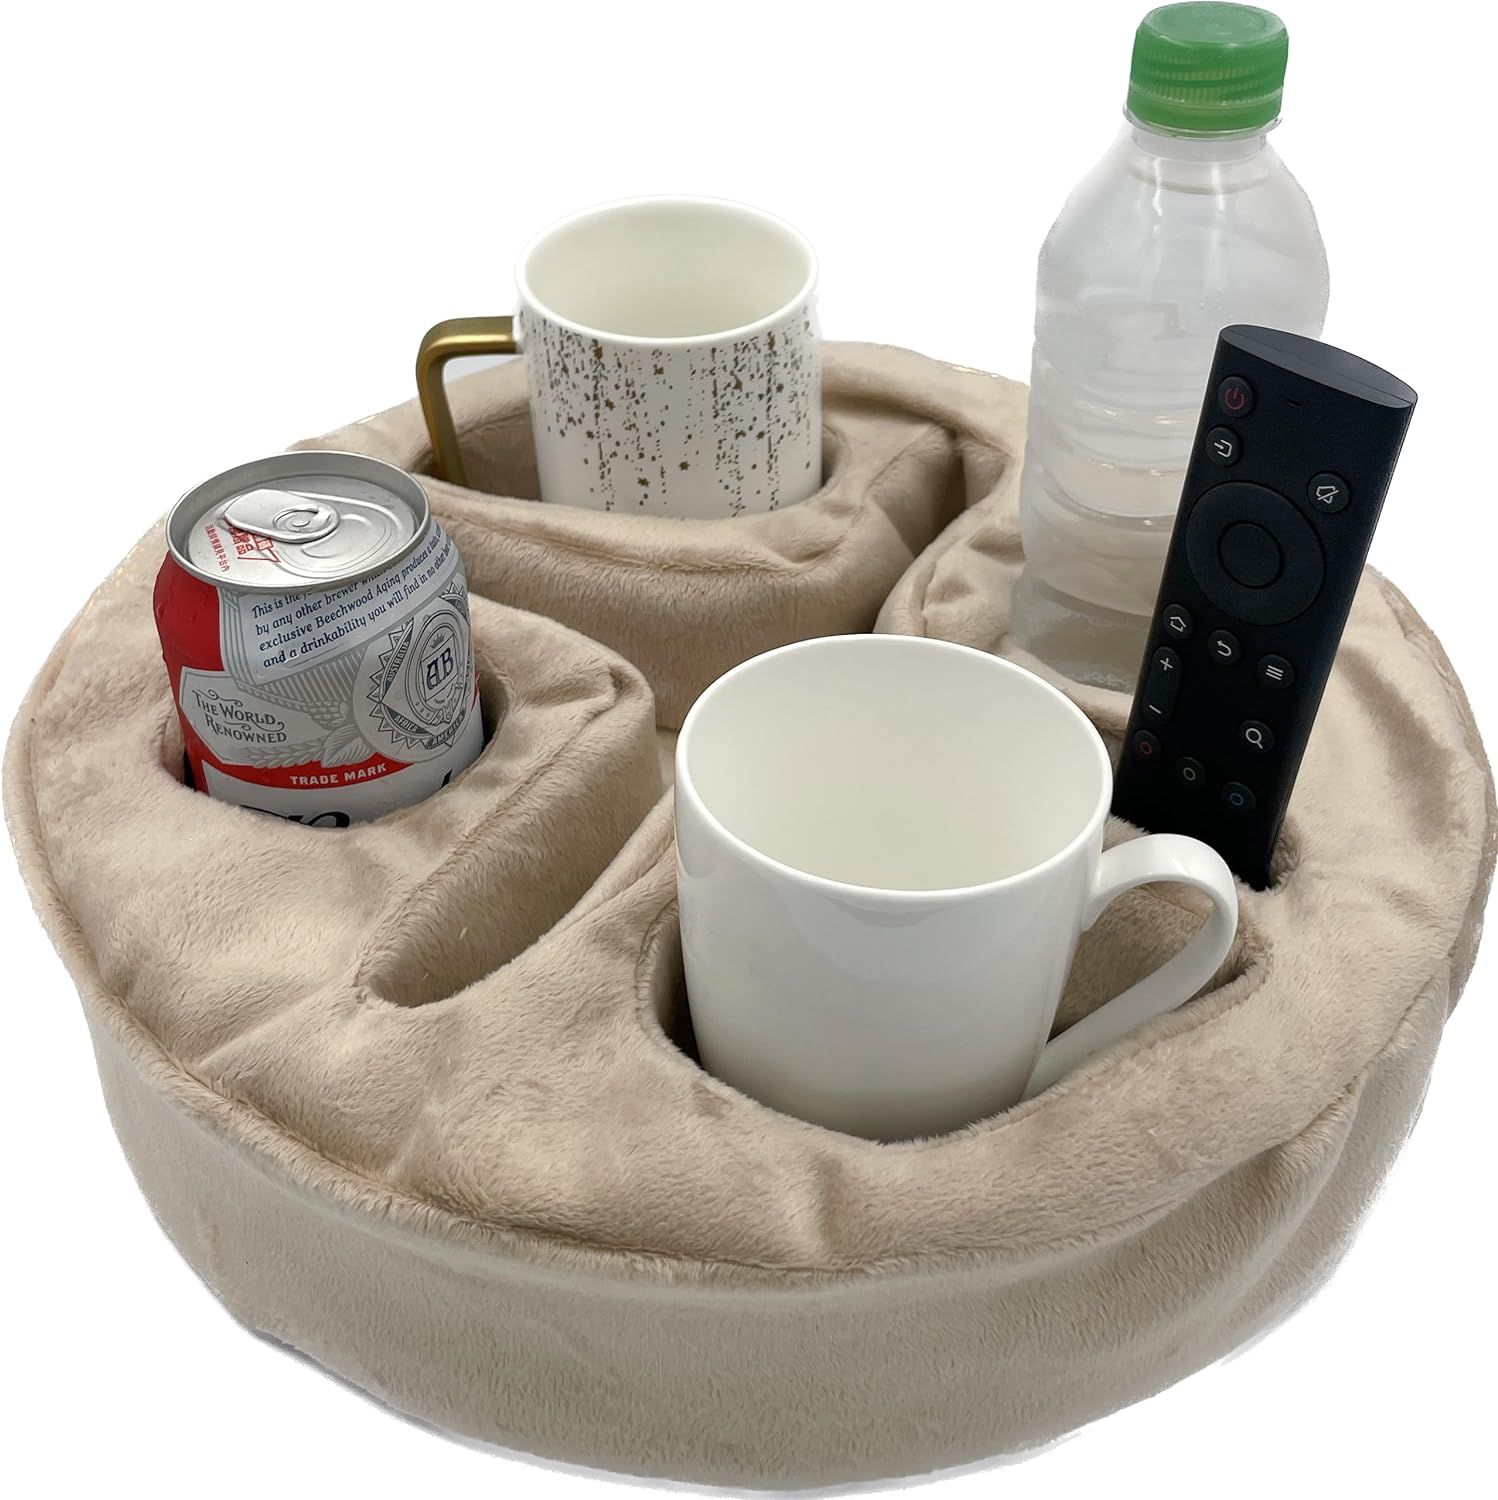 Couch and Bed Cup Holder Pillow, Sofa Organizer Caddy for Drinks, Remotes, Phones, Snacks (Beige) | Amazon (US)